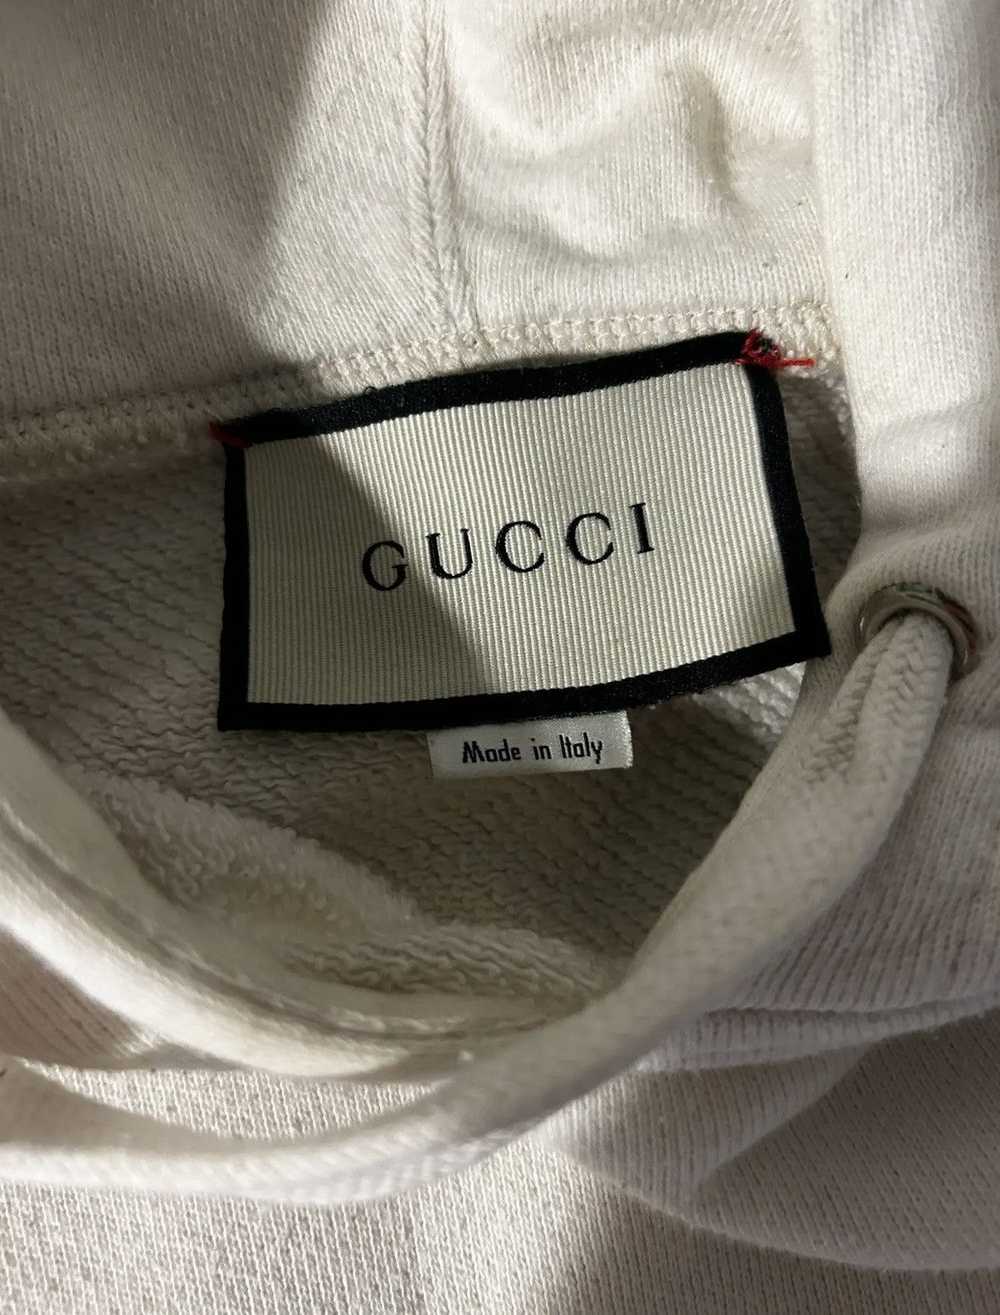 Gucci Gucci Hoodie “Guccify Yourself” - image 3